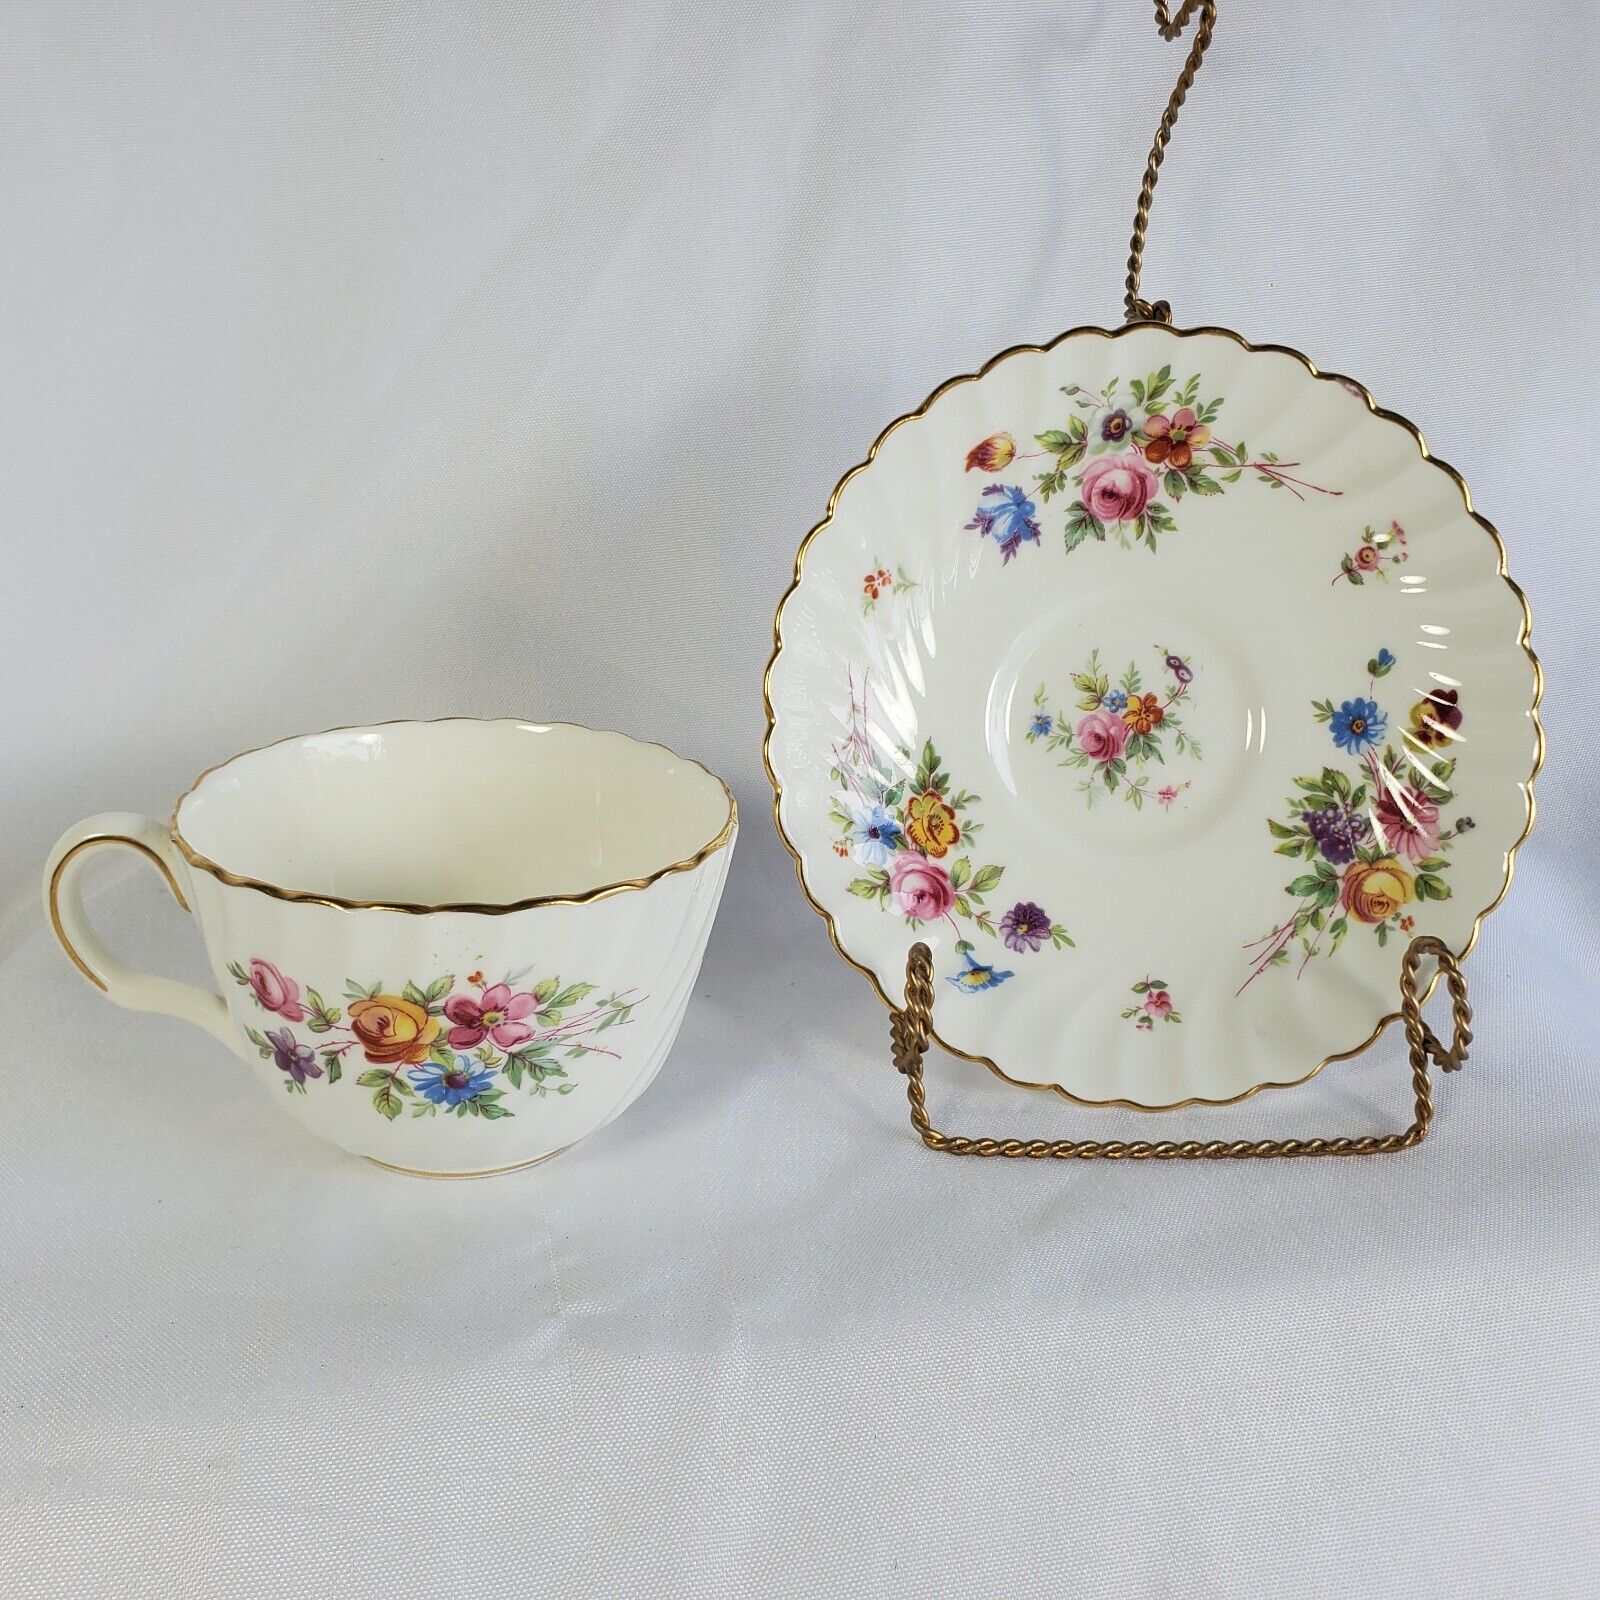 Vintage Mintons Teacup and Saucer Set Fine Bone China Marlow Made in England